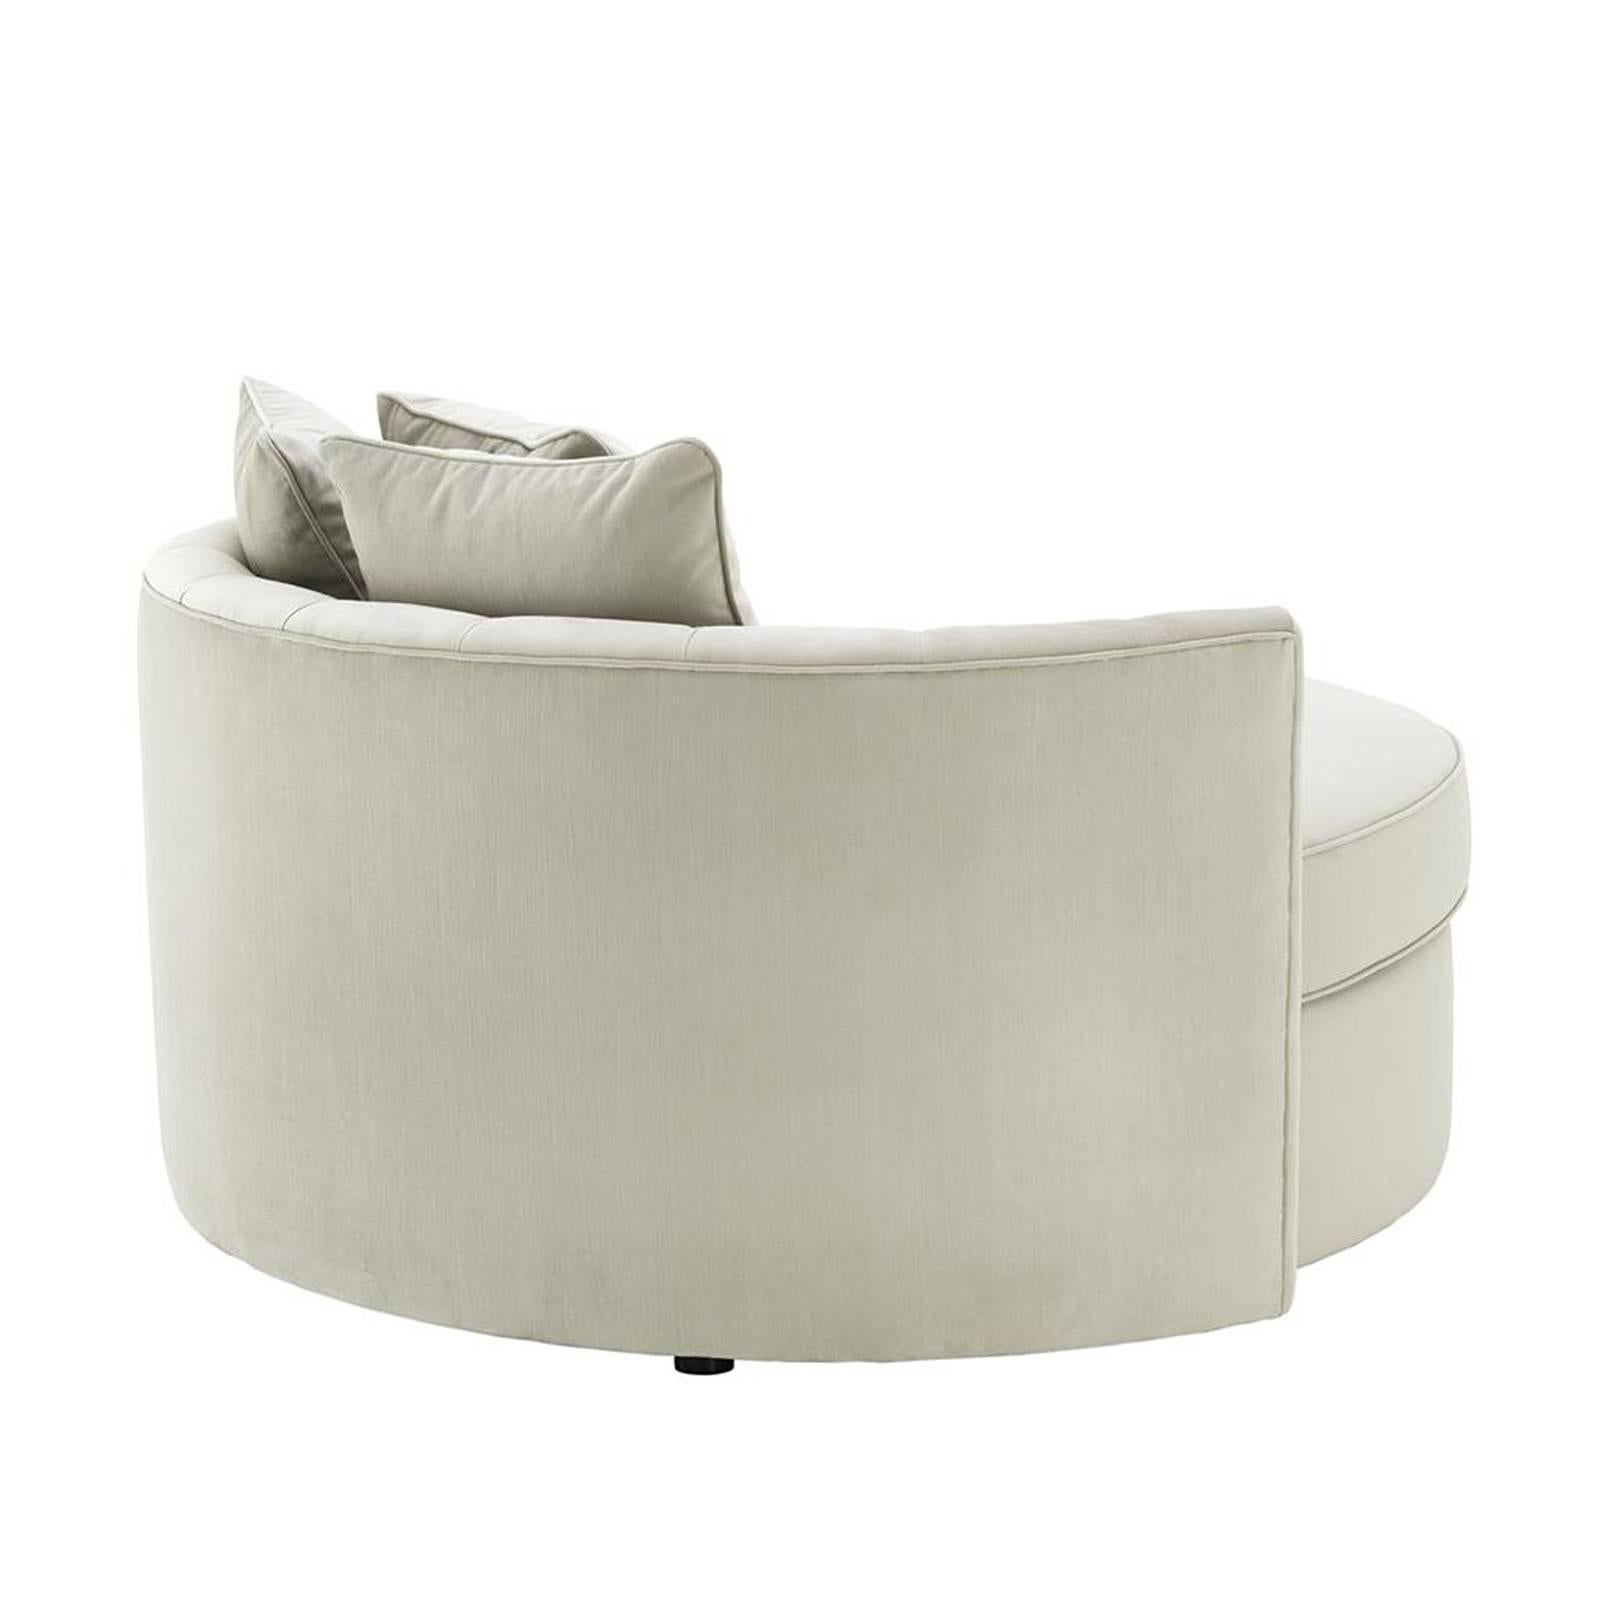 Hand-Crafted Erganza Round Sofa in Pebble Grey Fabric